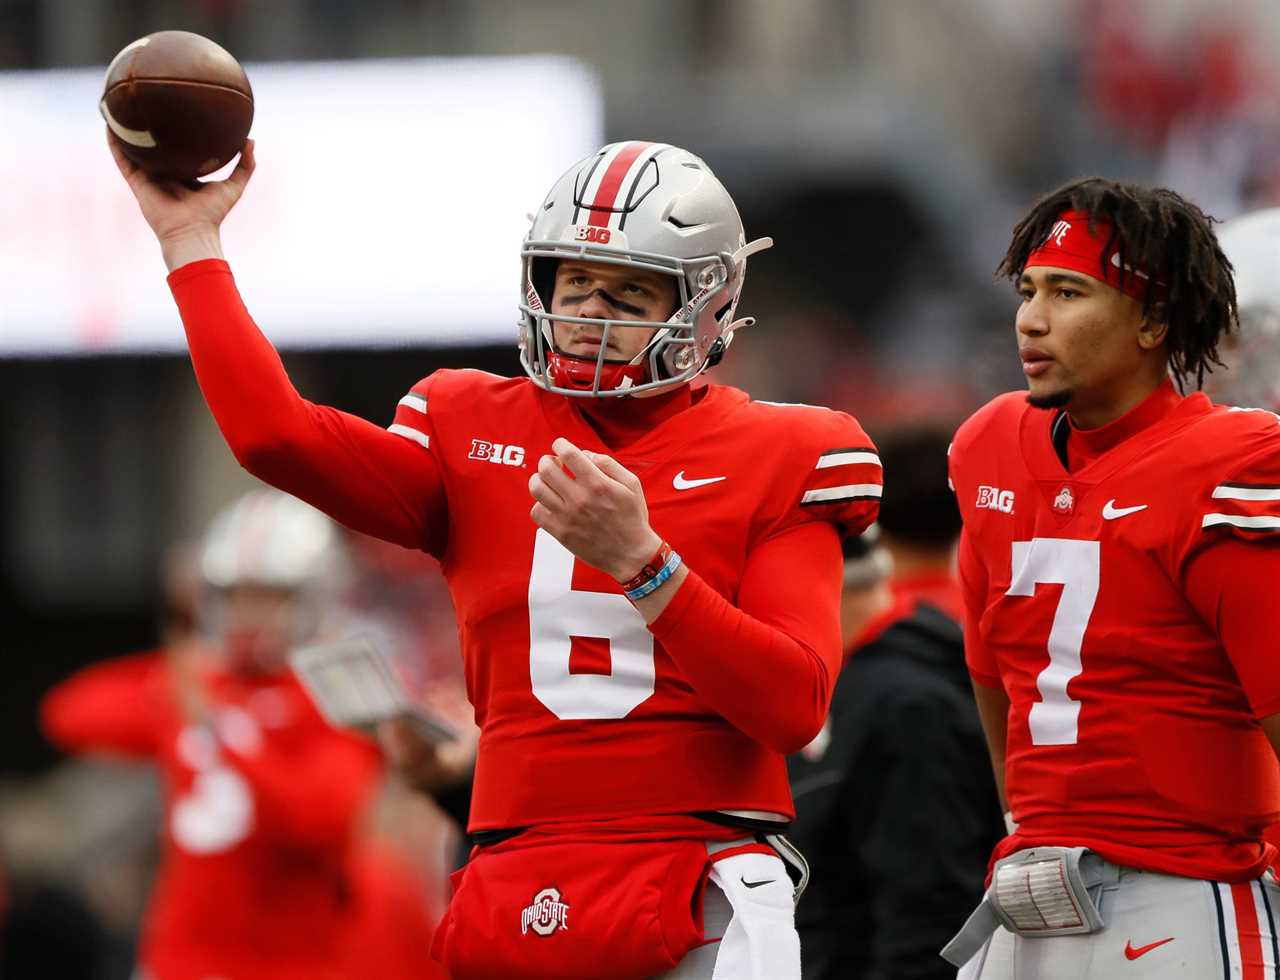 Ohio State offers one of the best 2026 quarterbacks in the country